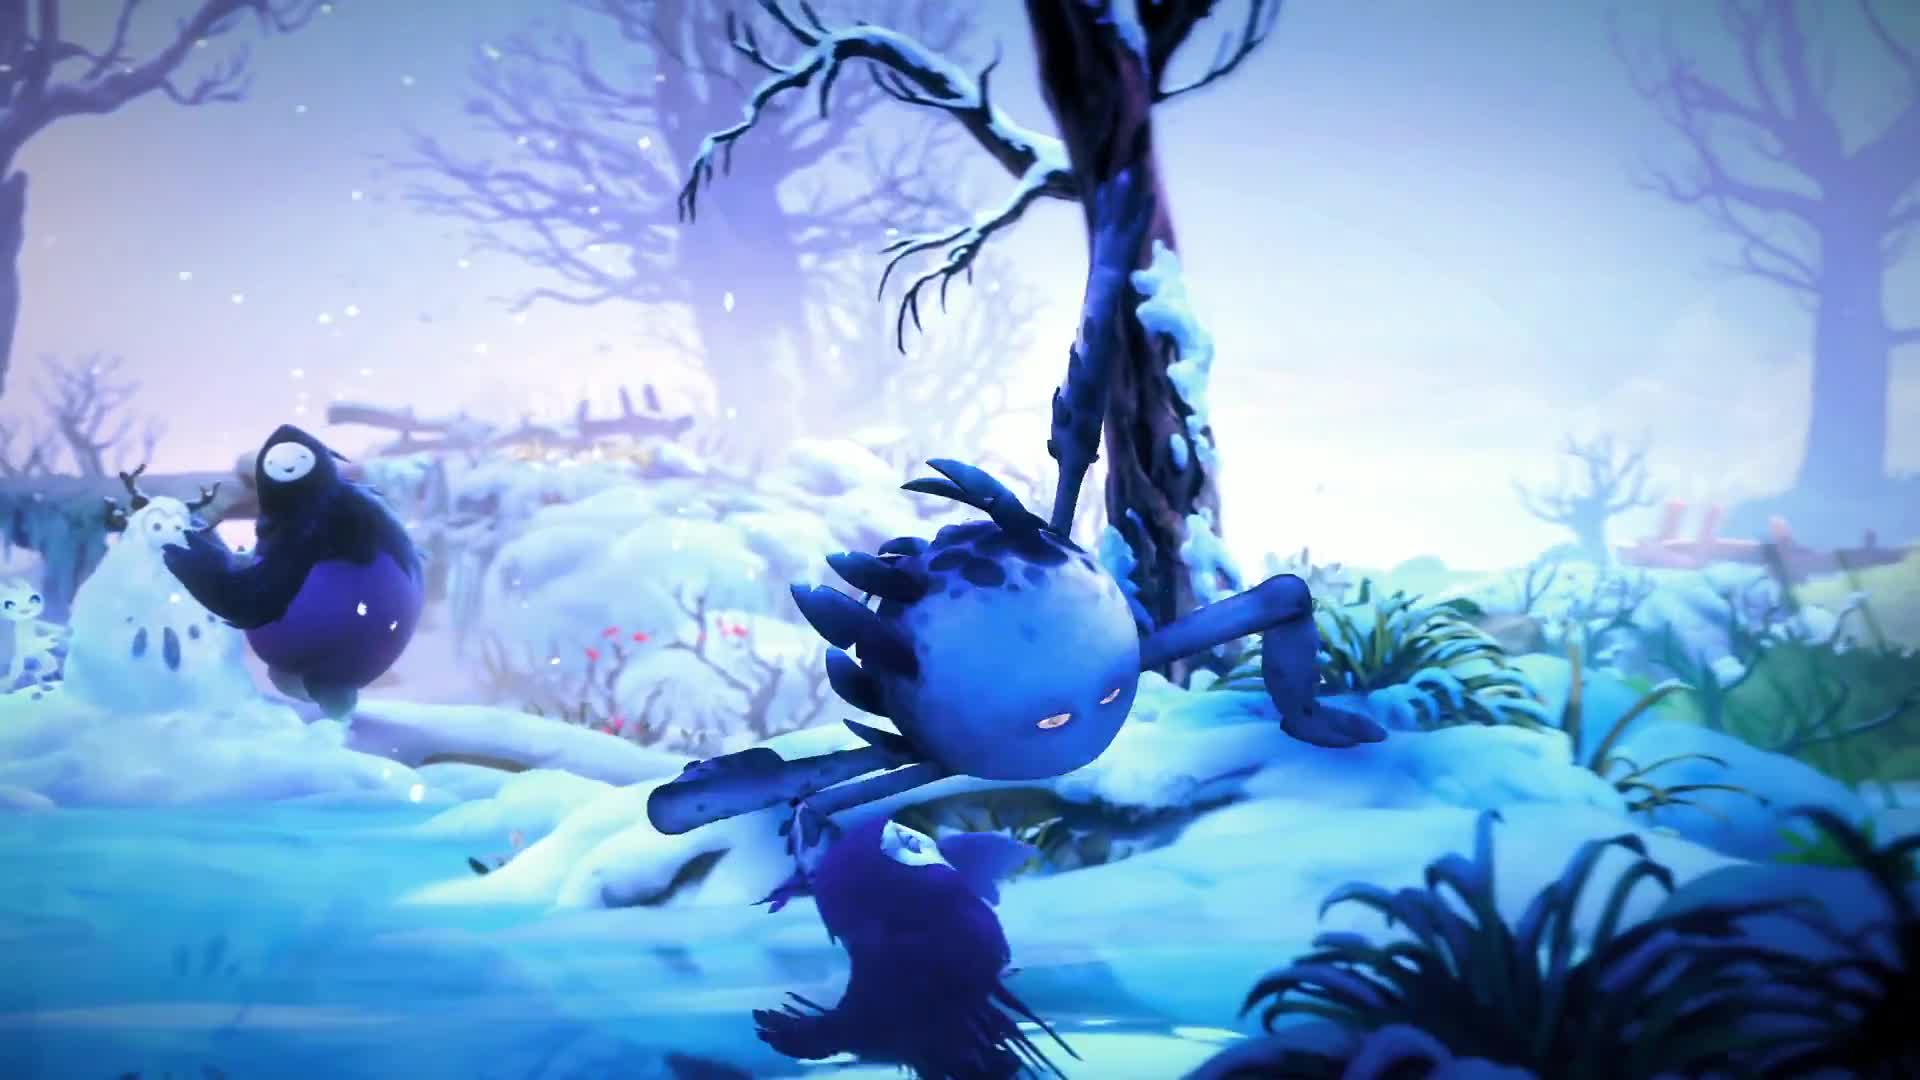 Ori and the Will of the Wisps - E3 2018 - Gameplay Trailer